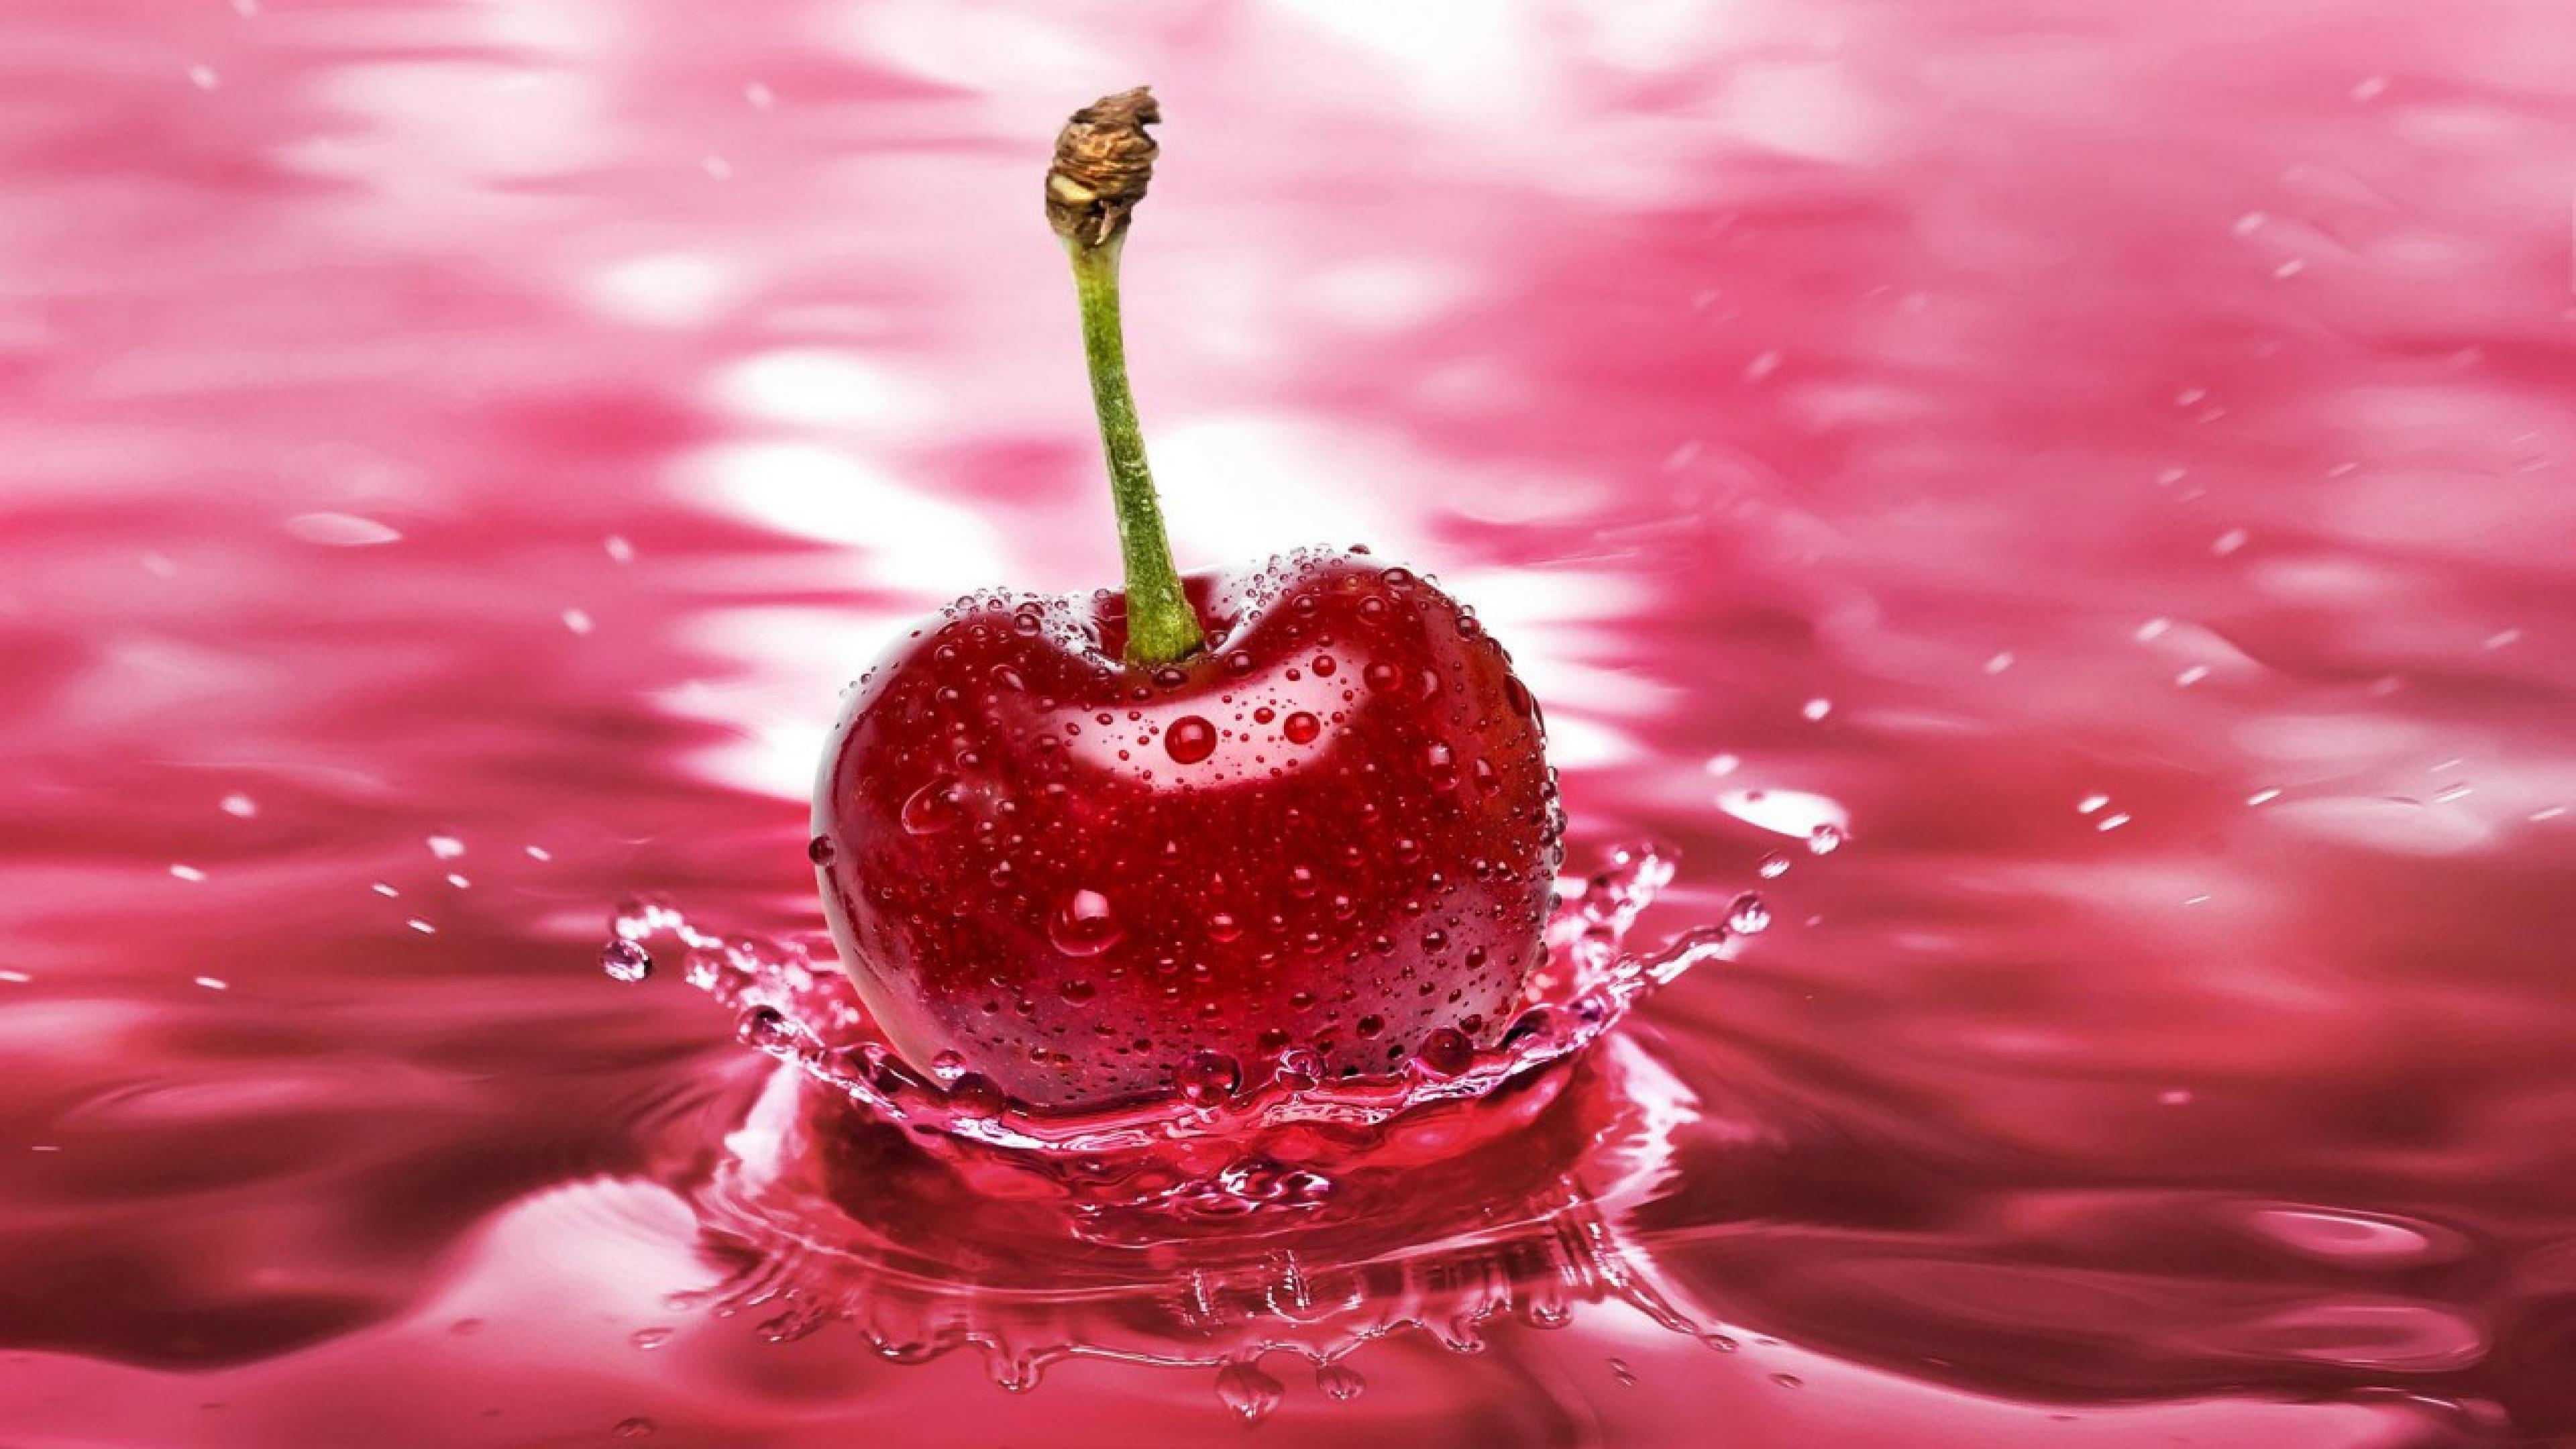 Red Cherry Water Drops Of Water Nature High Quality Wallpaper For Tablets  And Mobile Phones Free Download 3840x2160 : 